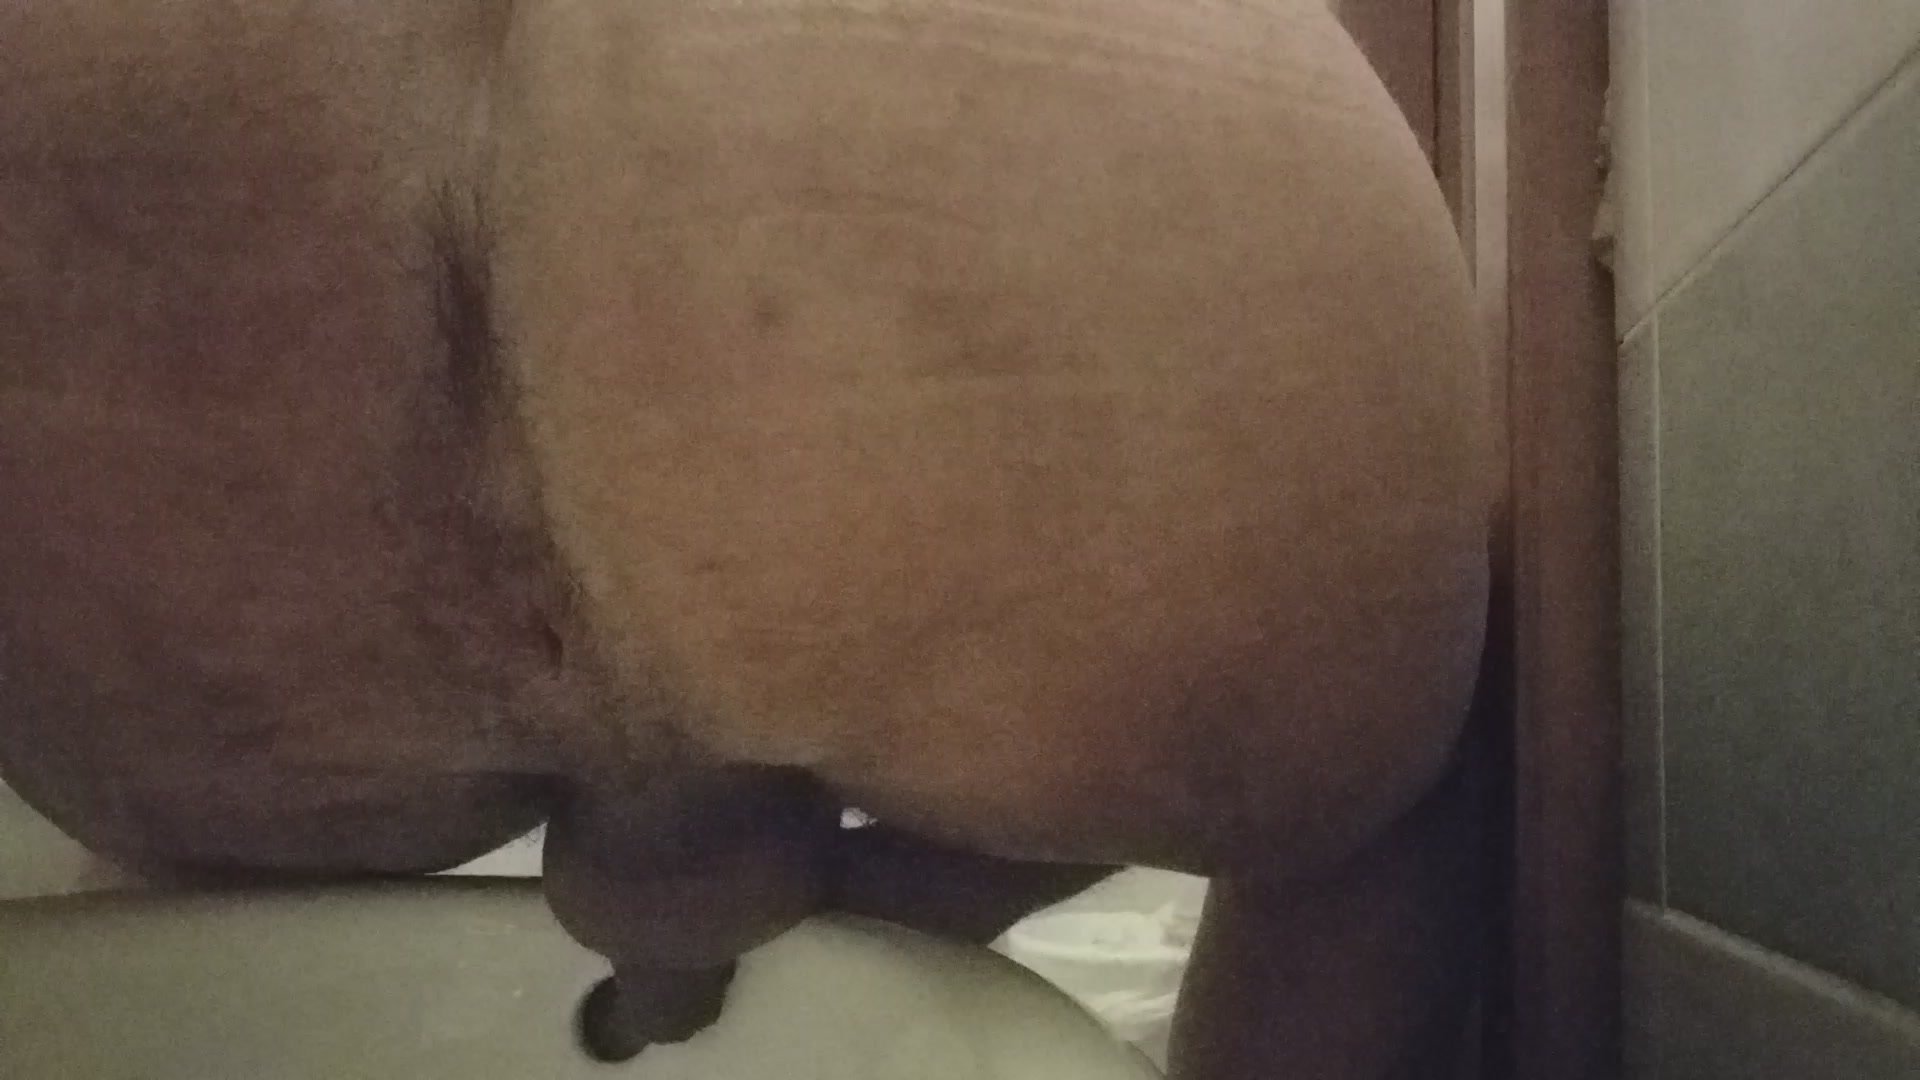 Big soft shit from behind